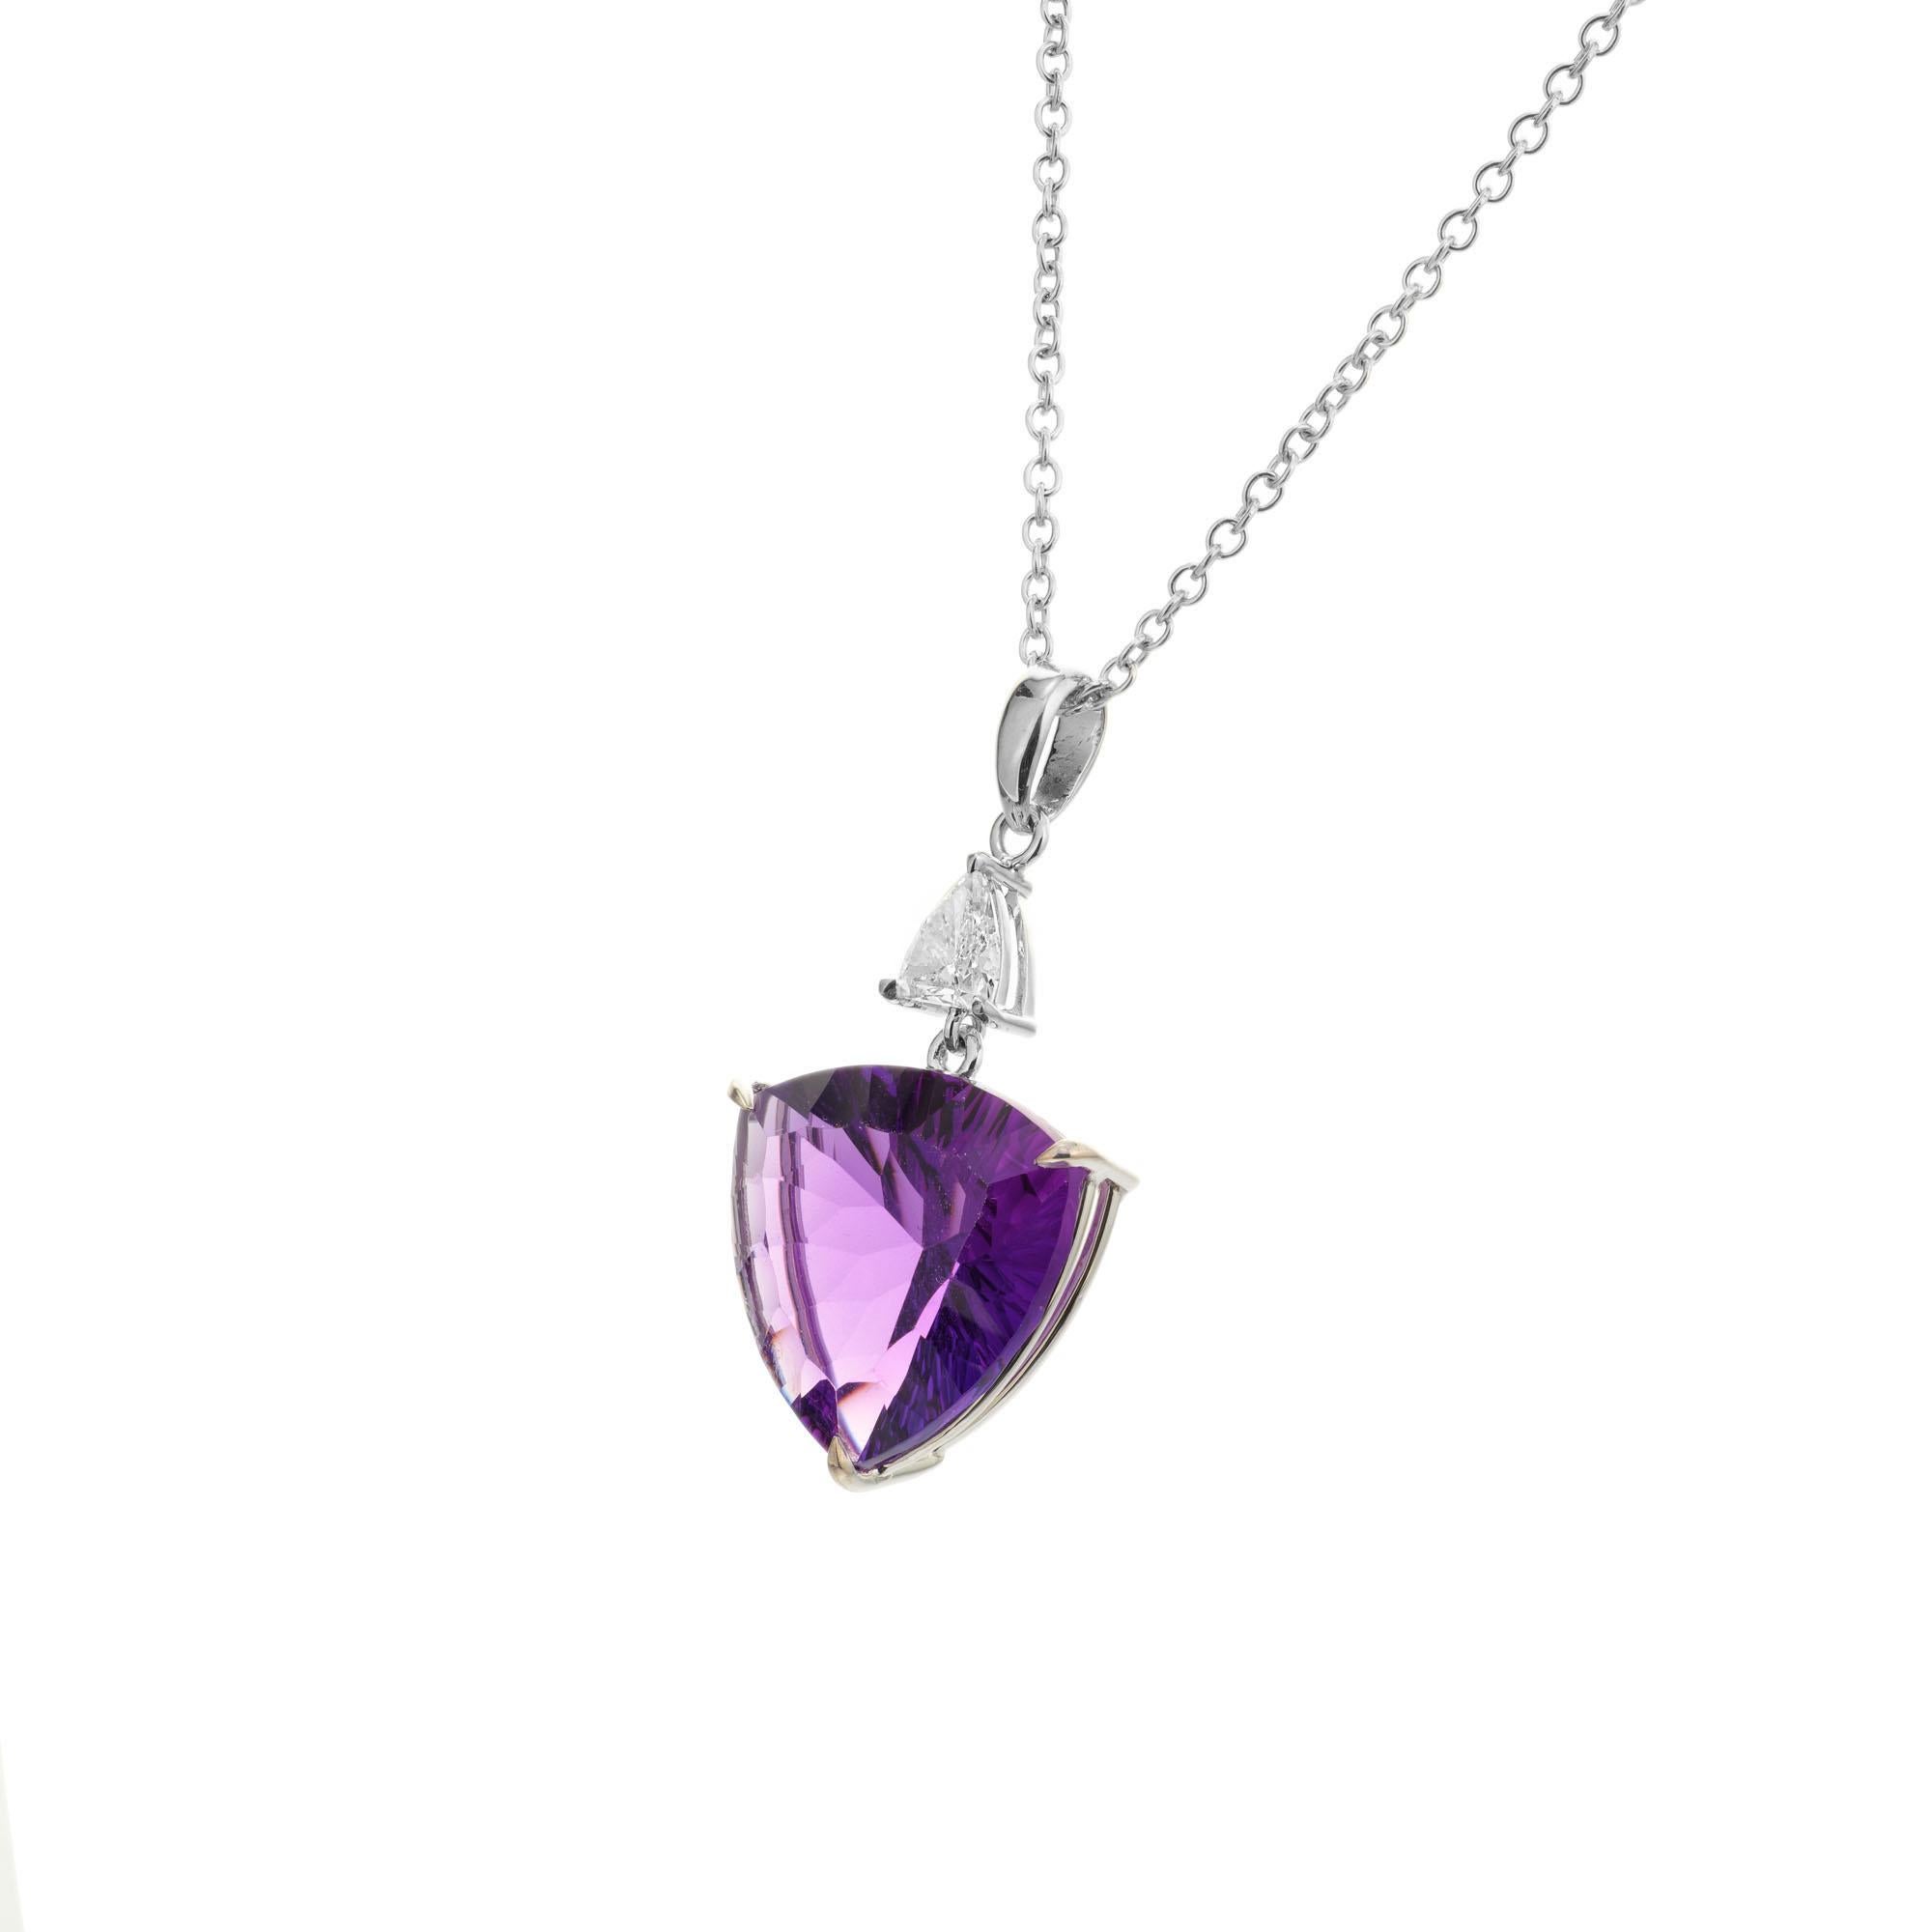 Amethyst and diamond pendant necklace. 9.25ct Triangle shaped cushion cut amethyst accented with a trilliant cut diamond set in 14k white gold pendant. 18 inch 14k white gold chain. Designed and crafted in the Peter Suchy workshop.

1 triangular